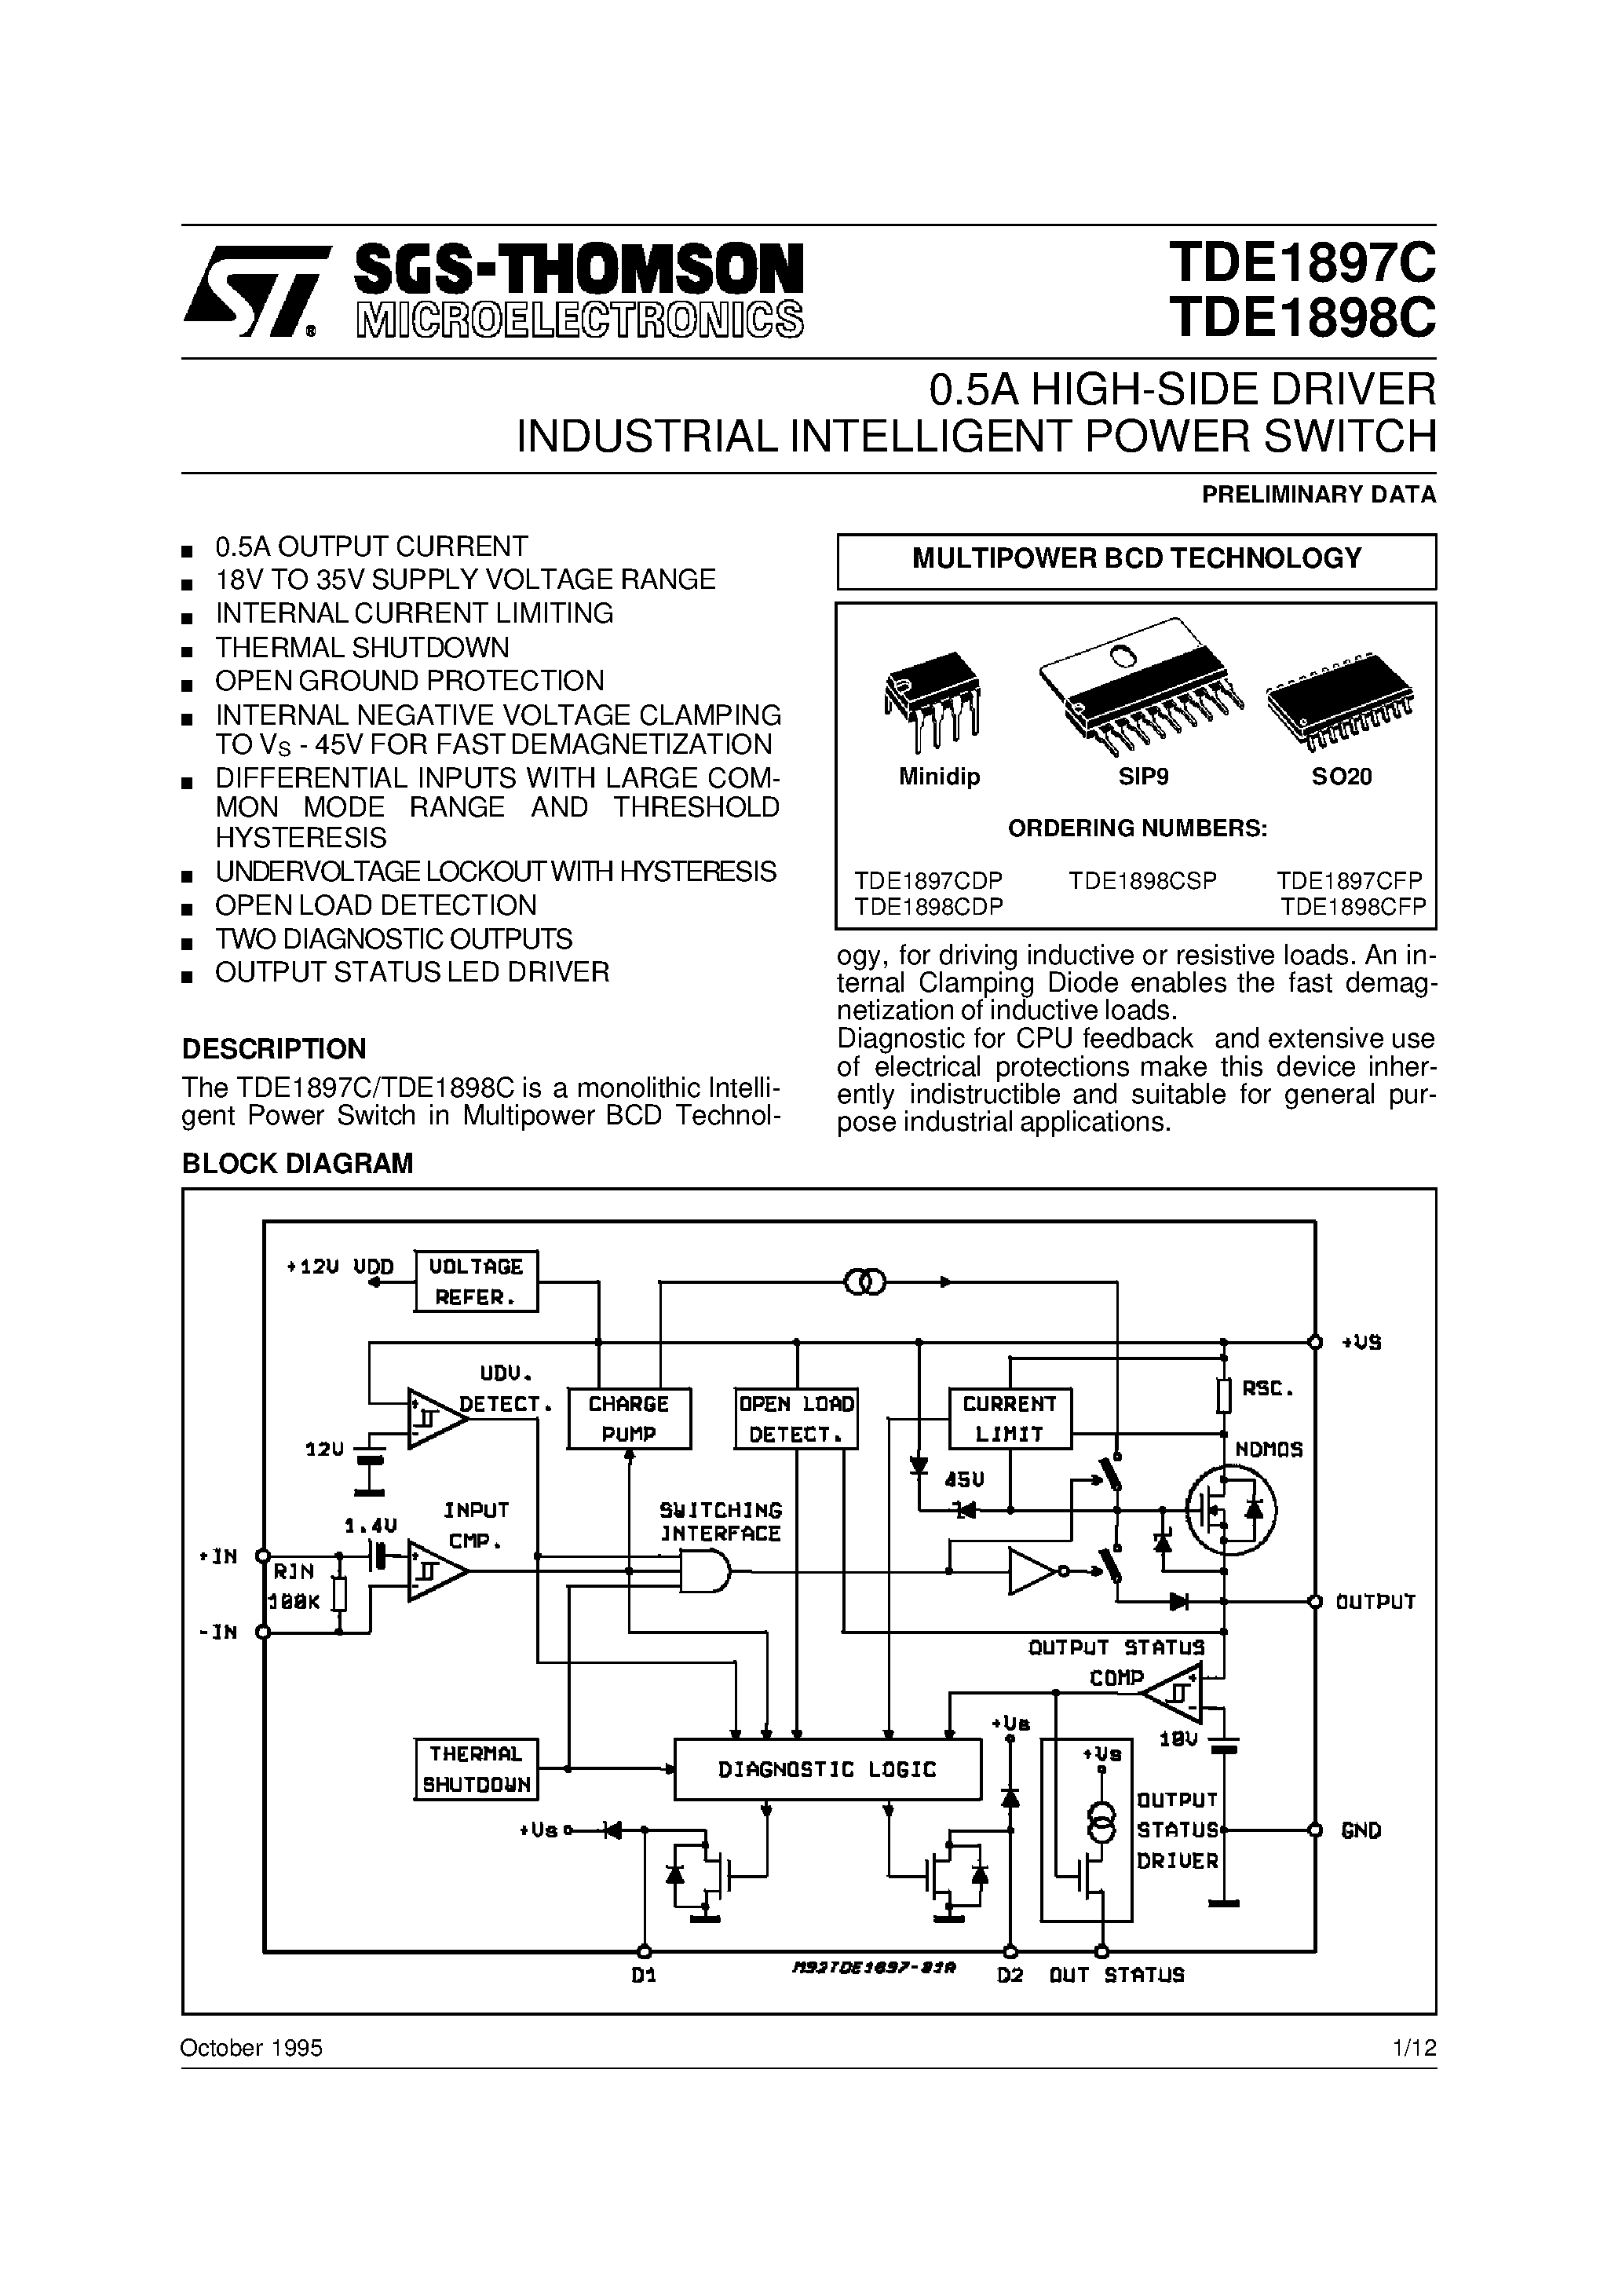 Даташит TDE1897CDP - 0.5A HIGH-SIDE DRIVER INDUSTRIAL INTELLIGENT POWER SWITCH страница 1